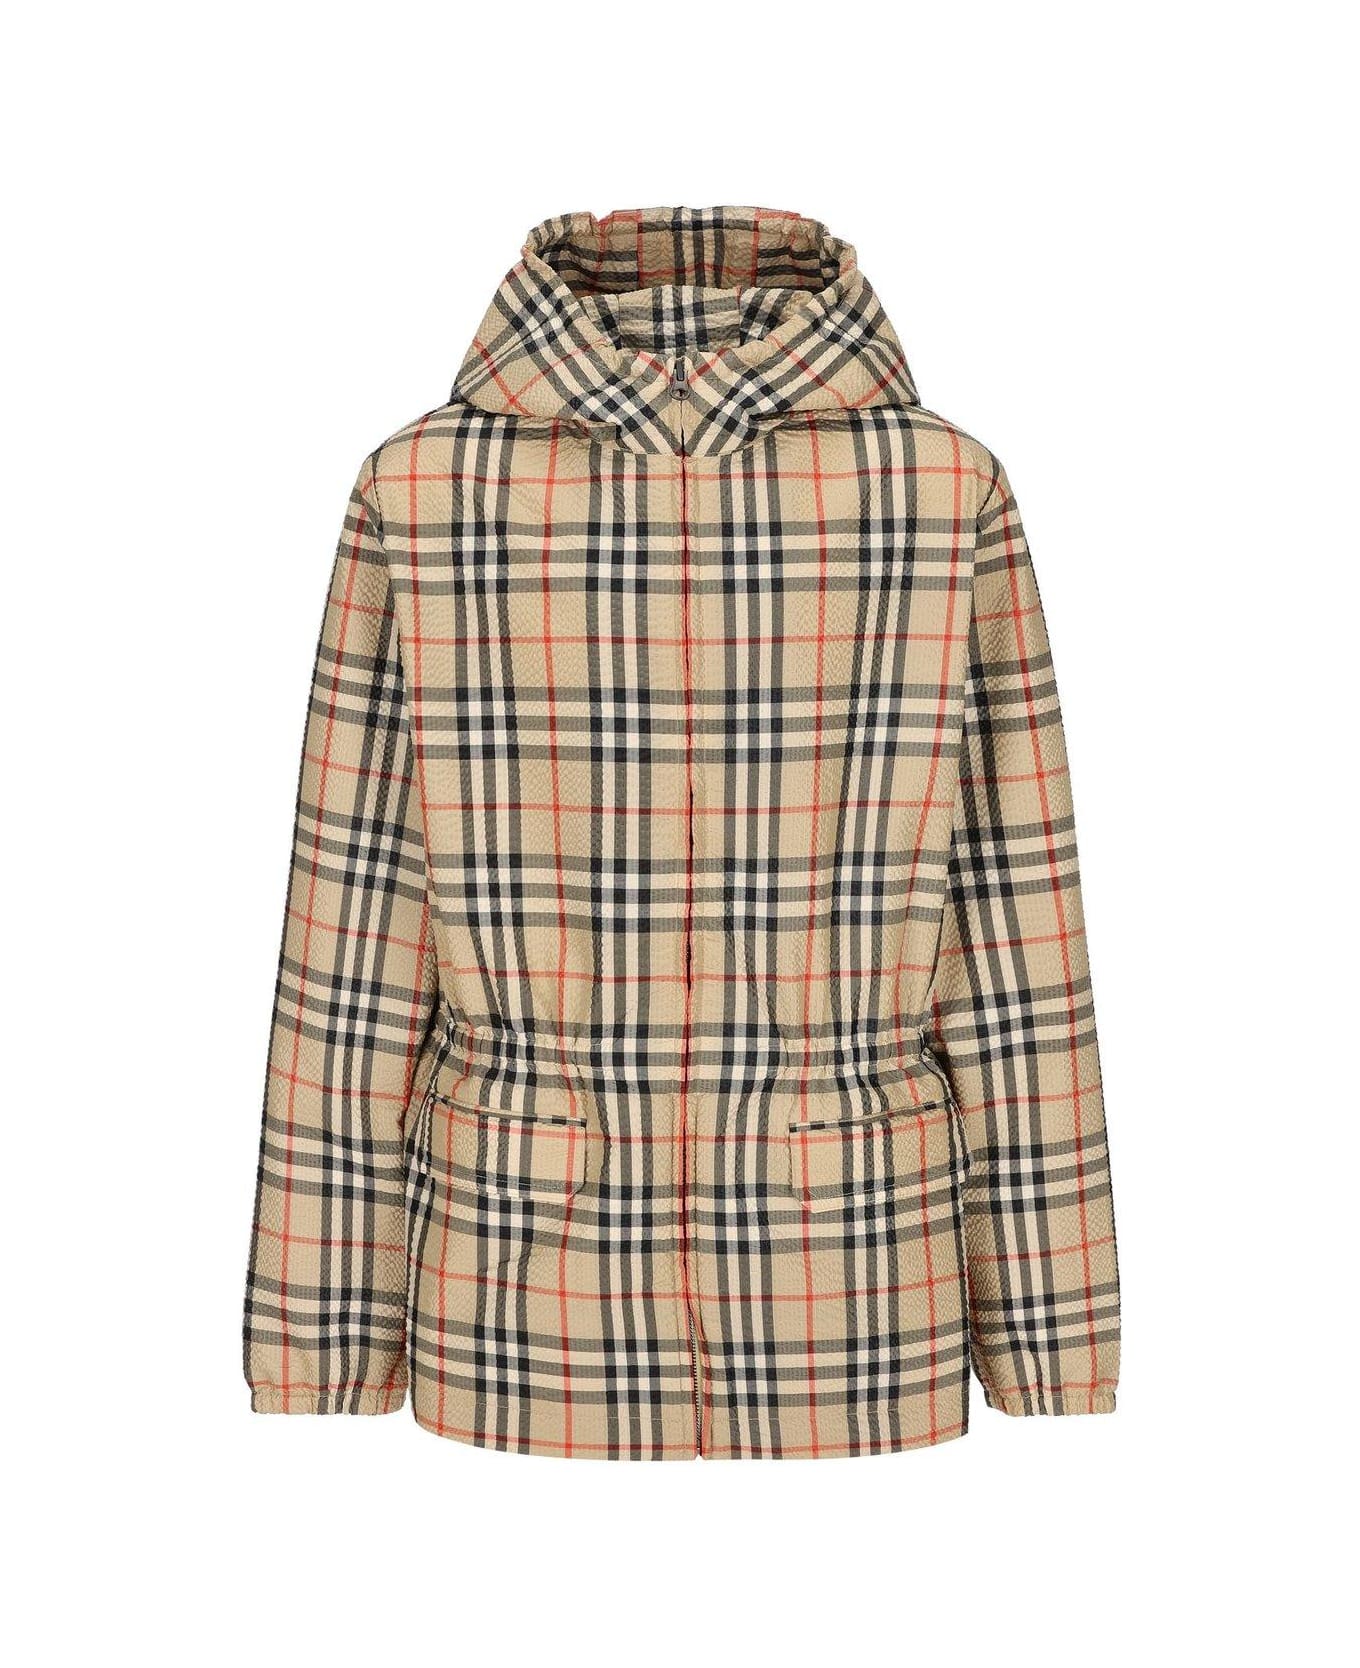 Burberry Vintage Check Hooded Zipped Jacket - Archive beige